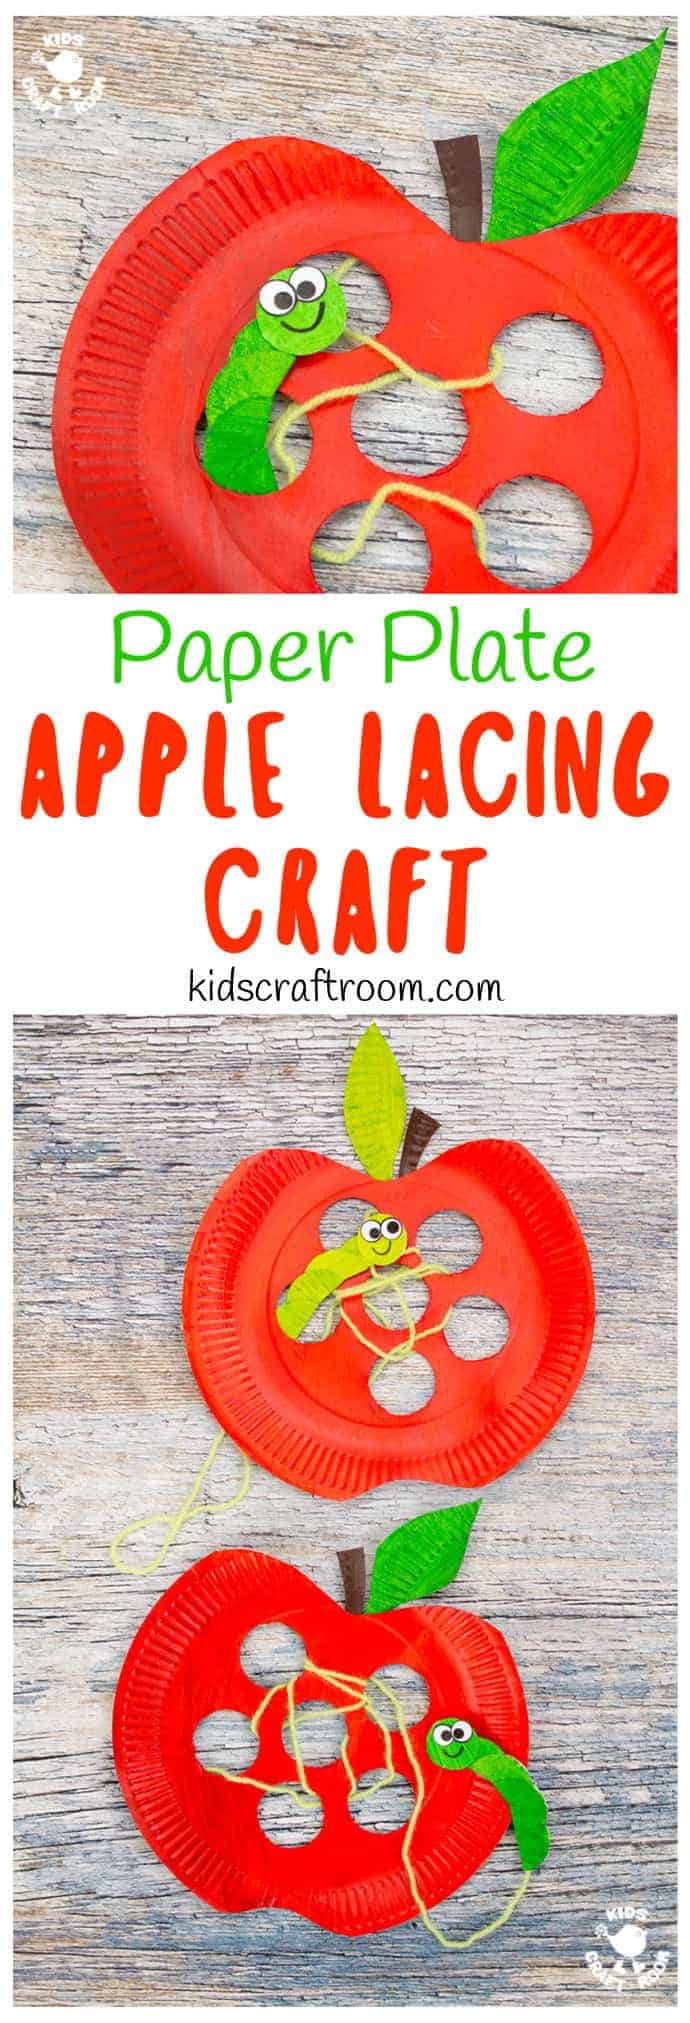 This Paper Plate Apple Lacing Craft is adorable with the cutest worm for kids to thread in and out! A fabulous interactive apple craft and fun way to build fine motor skills. A simple Fall craft for kids that's fun and educational. #apples #apple #paperplatecrafts #applecrafts #appleactivities #motorskills #finemotorskills #threading #lacing #lacingcrafts #kidscrafts #preschoolcrafts #kidsactivities #kidscraftroom